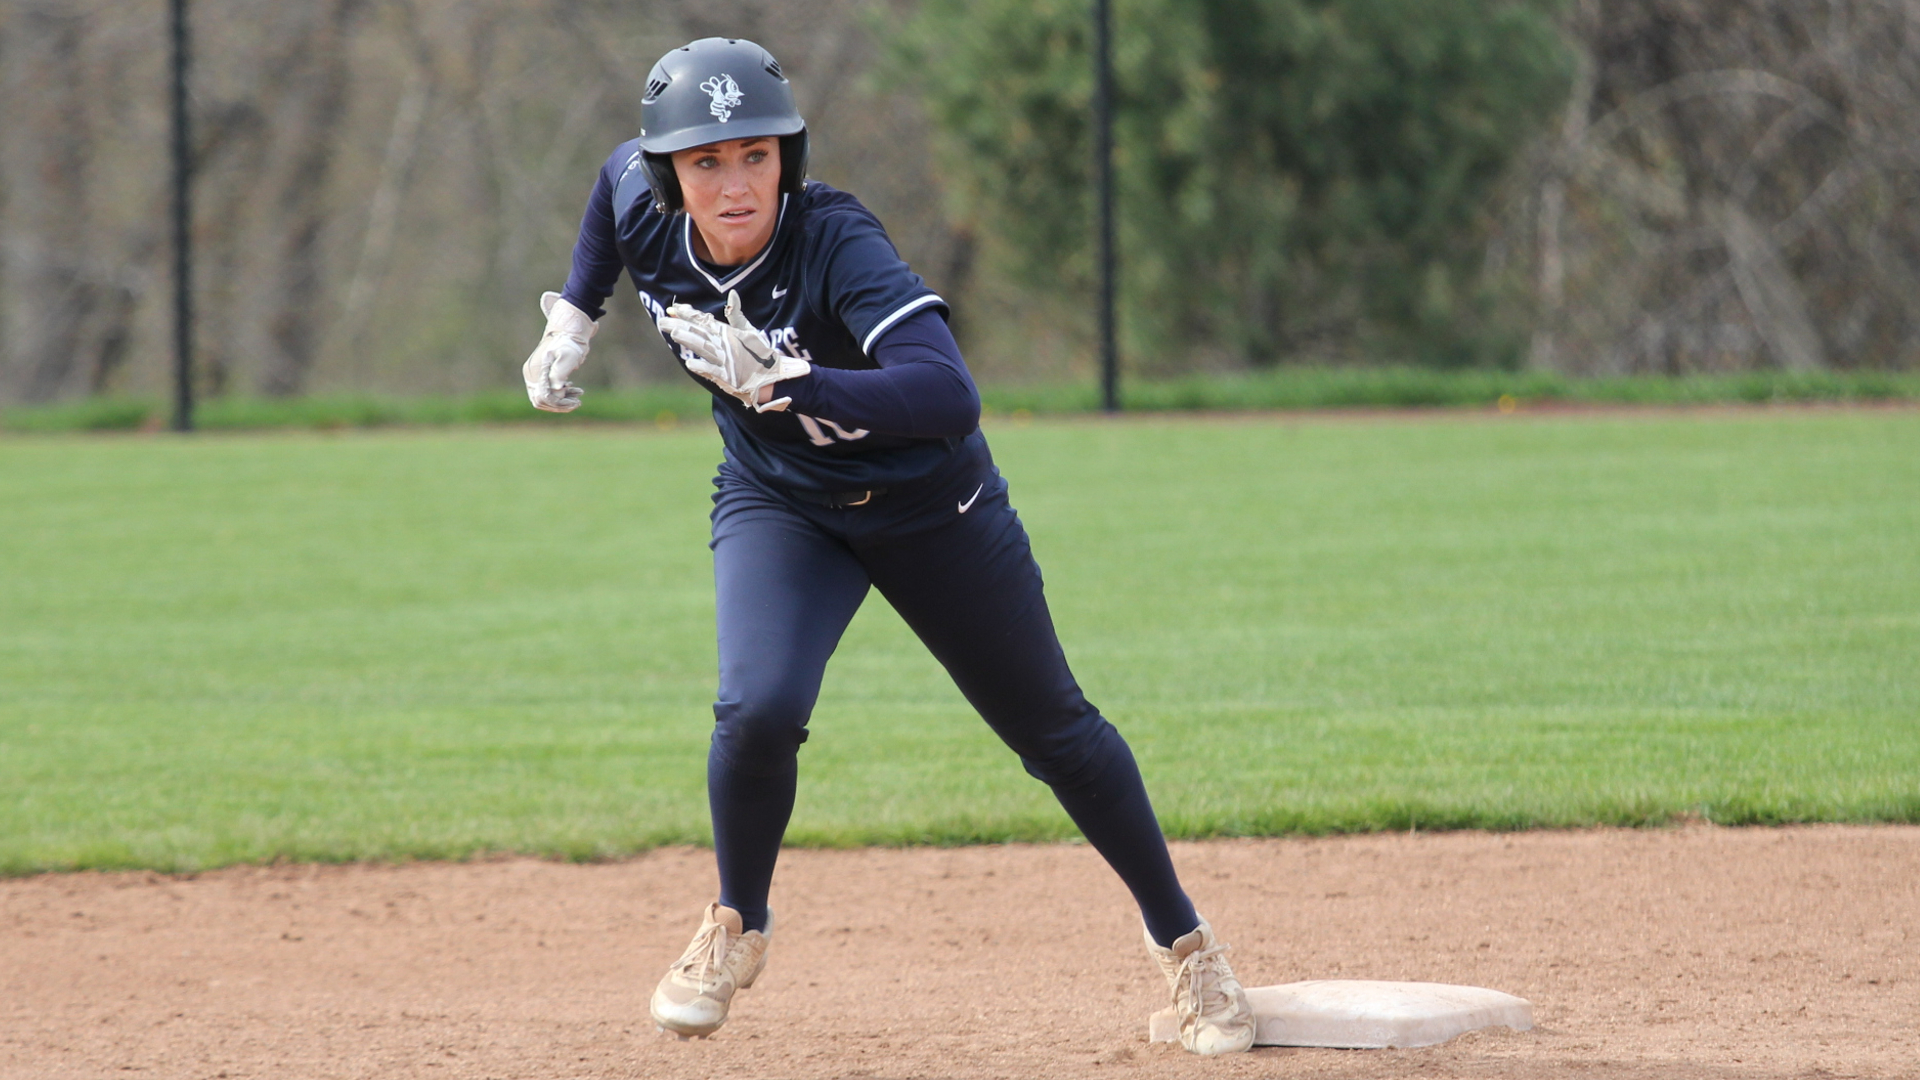 Two walk-off losses end SAU's run at CCAC Tourney